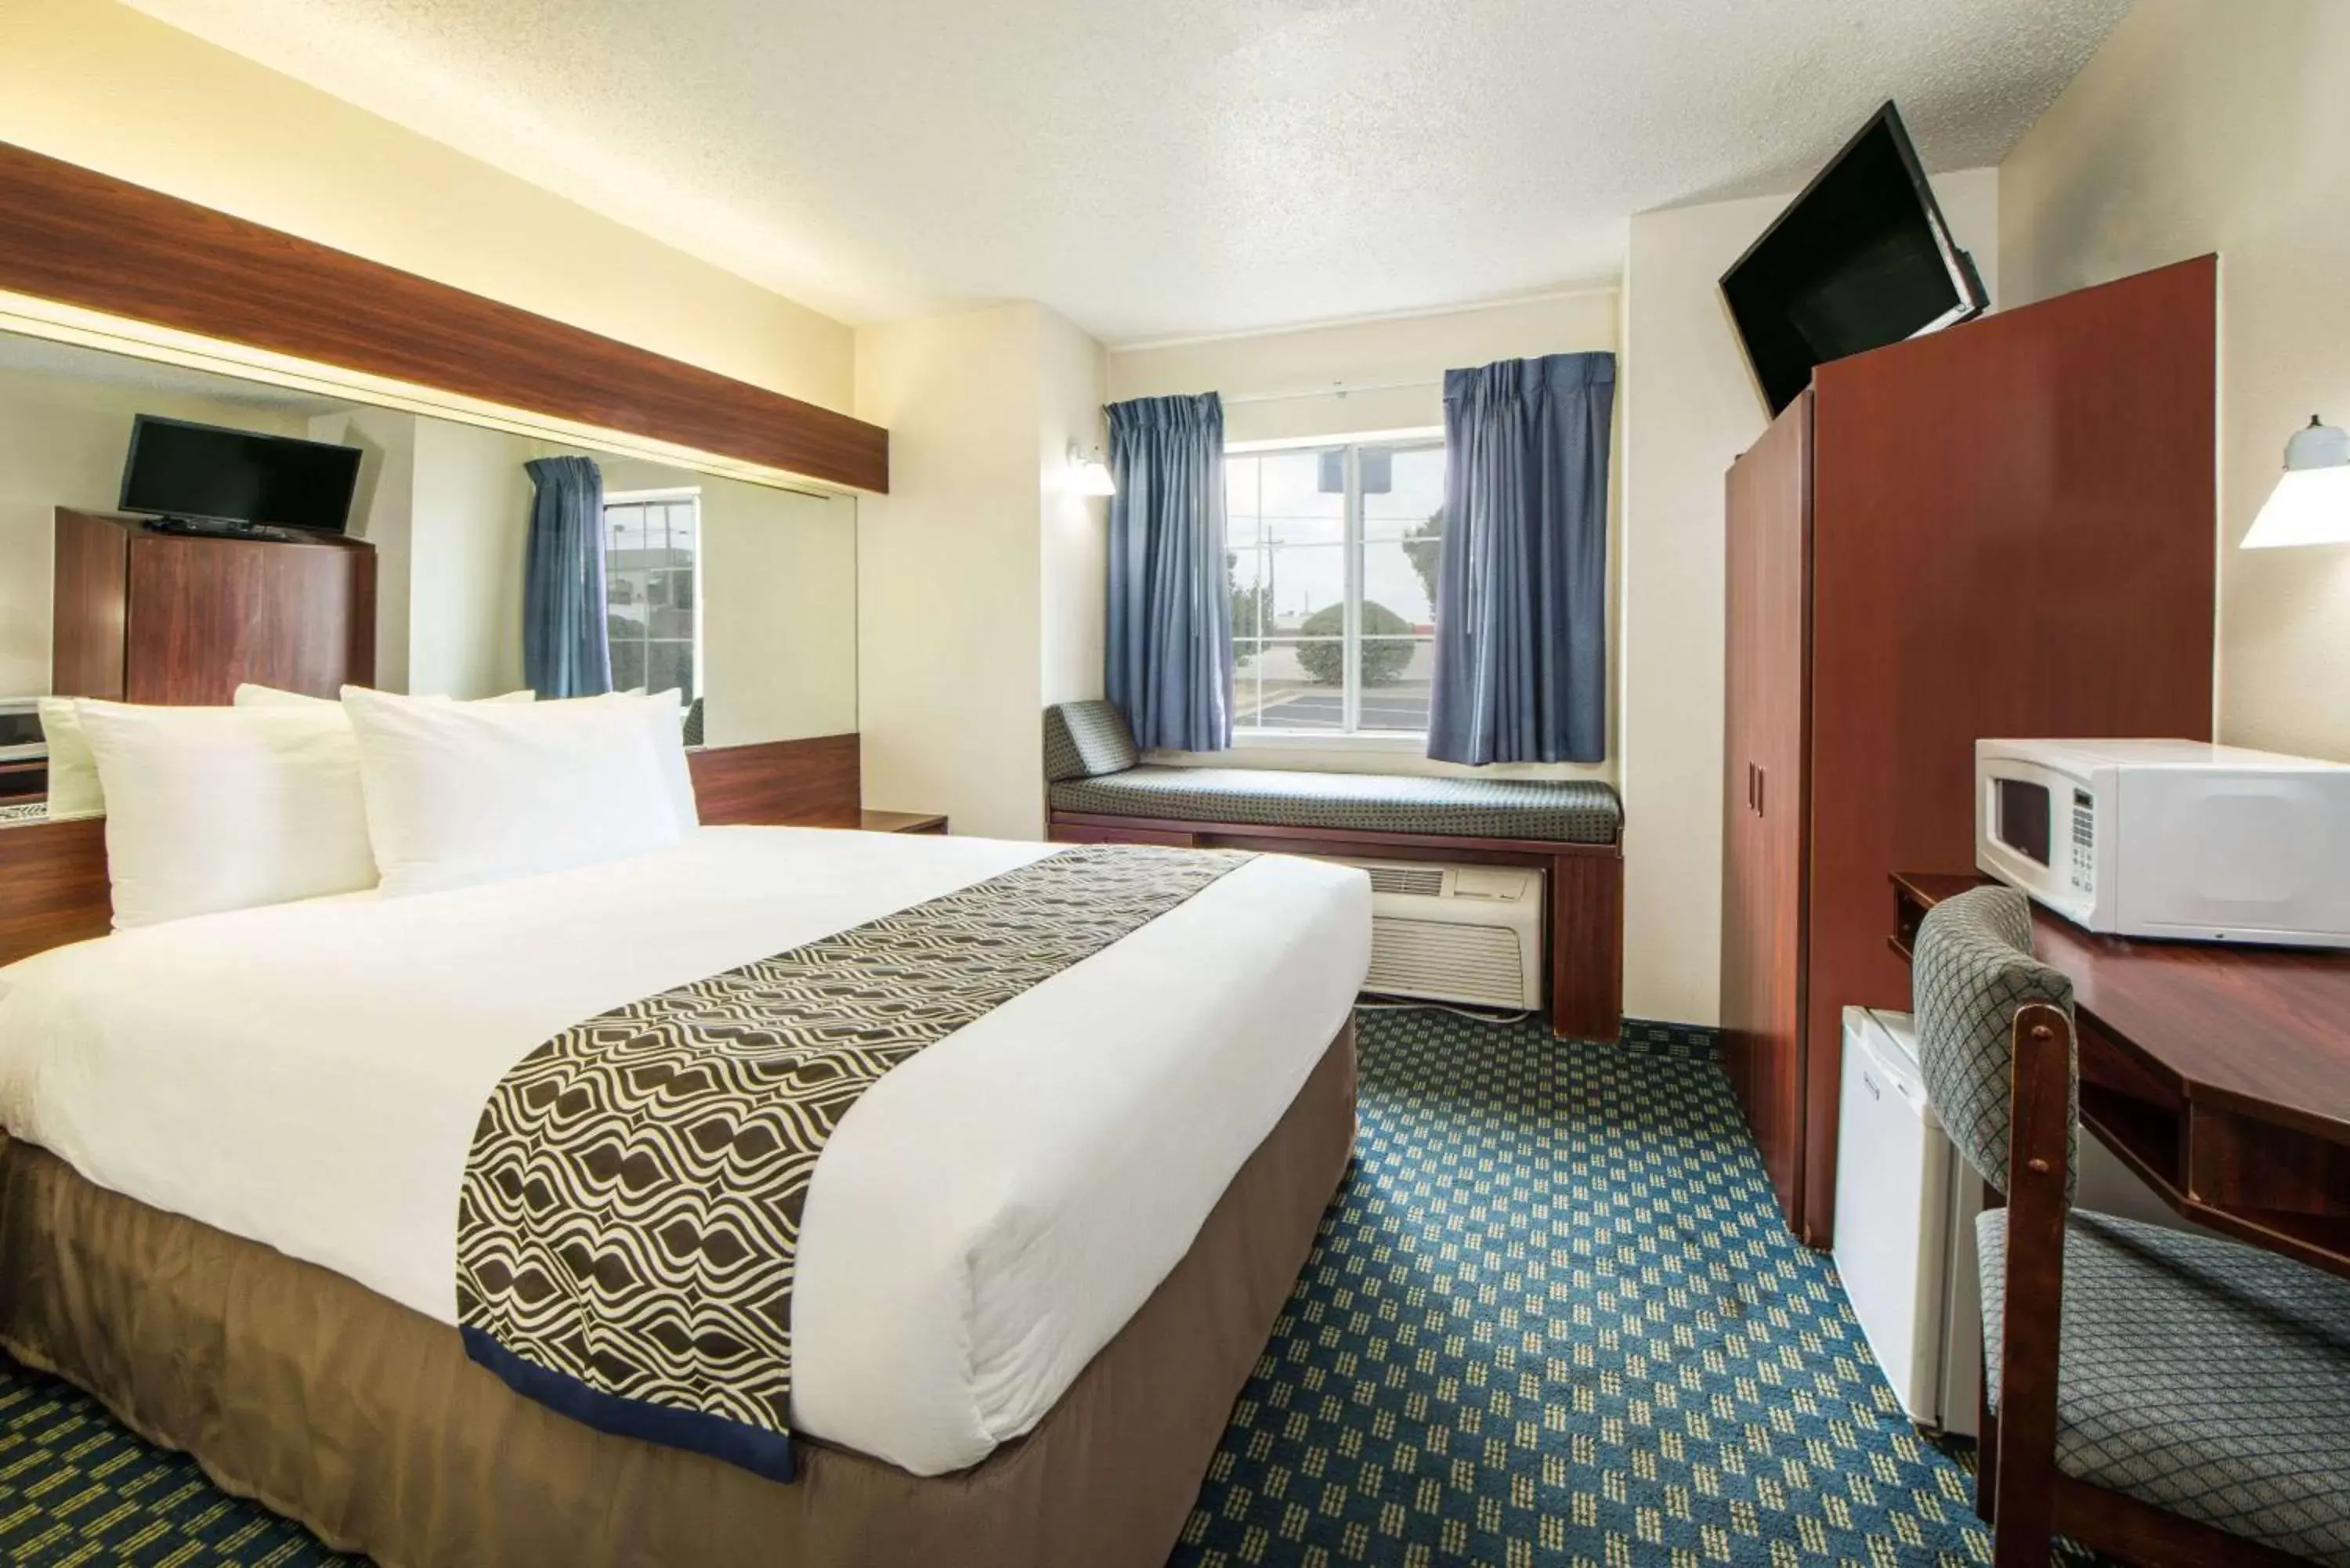 Photo of the whole room in Microtel Inn & Suites by Wyndham Tulsa - Catoosa Route 66